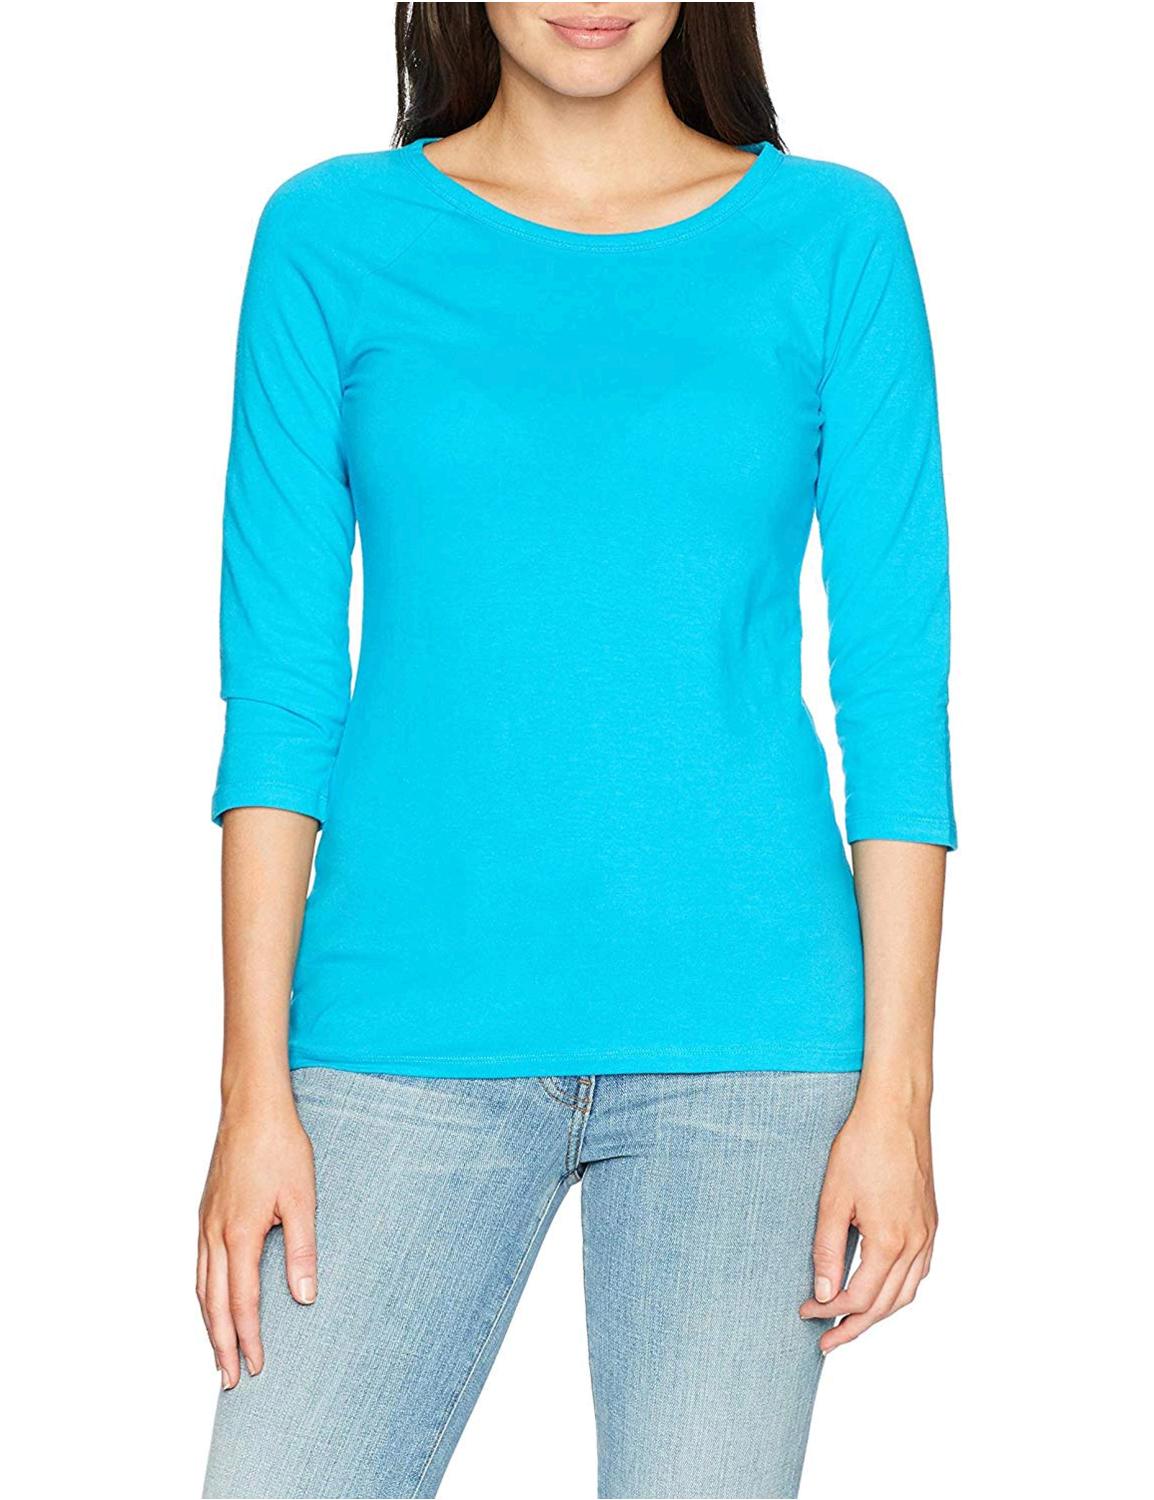 Hanes Women's Stretch Cotton Raglan Sleeve Tee,, Flying Turquoise, Size ...